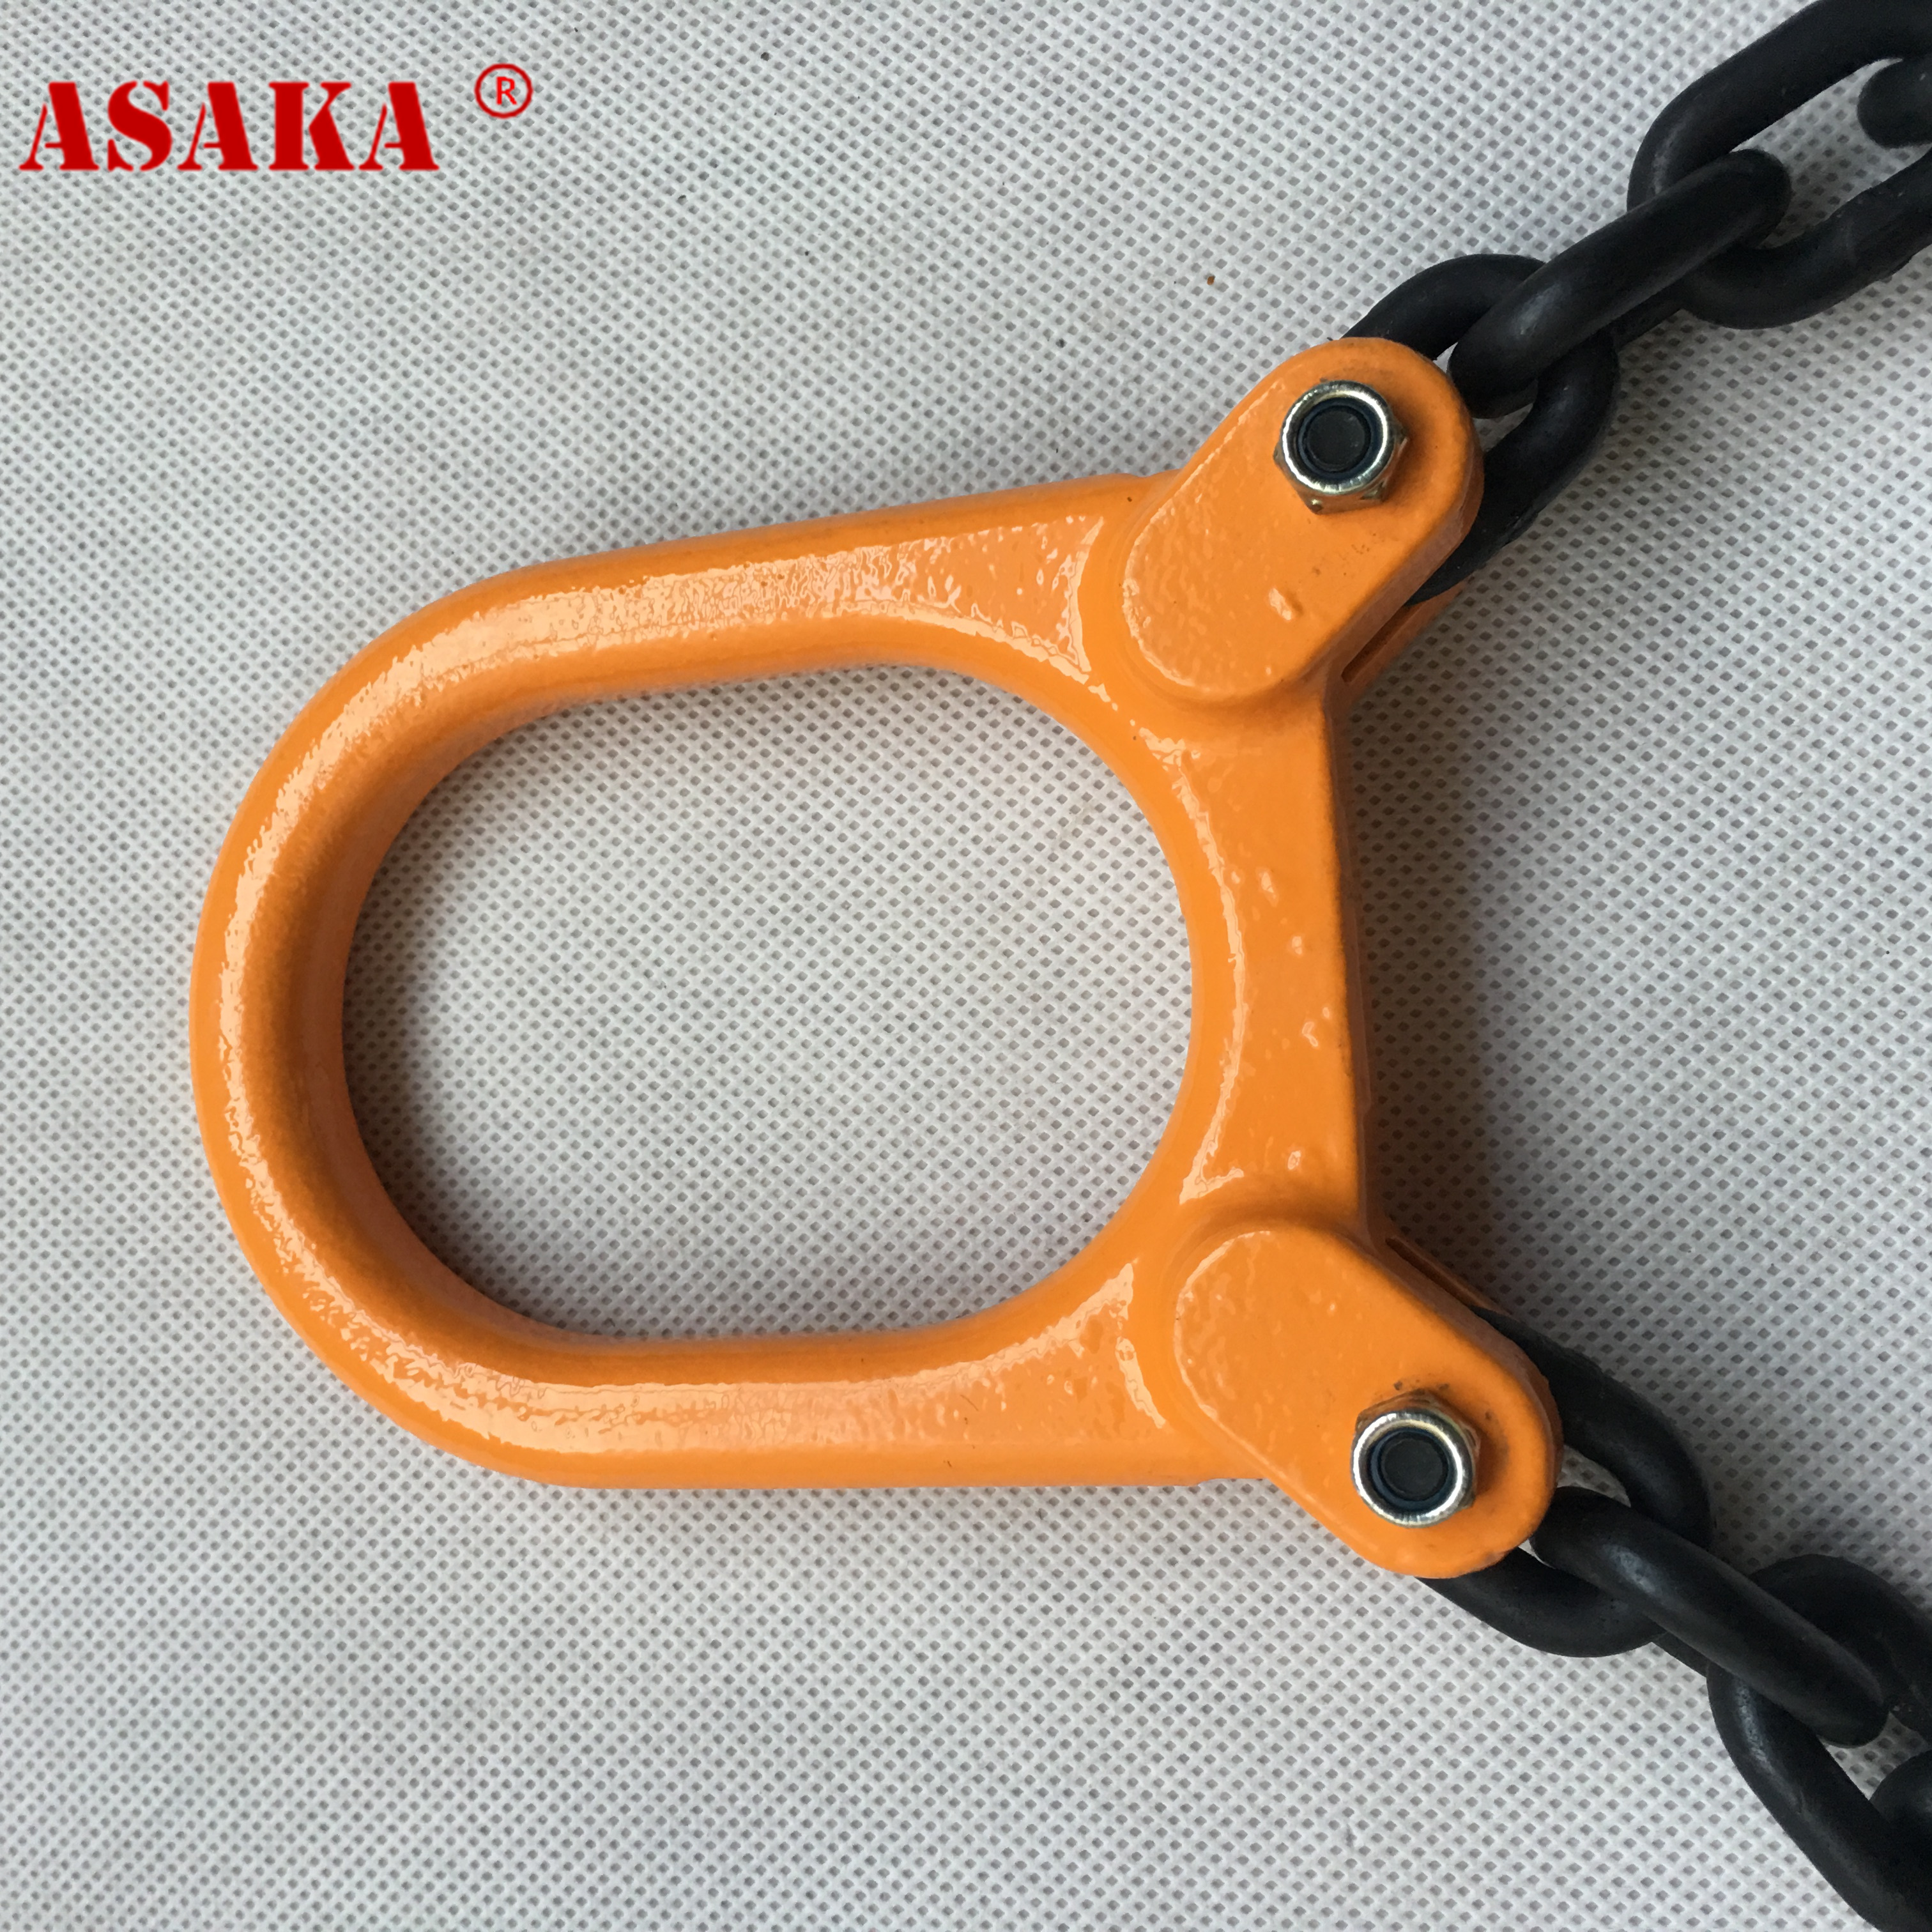 Competitive Price  Chain Sling with High Quality